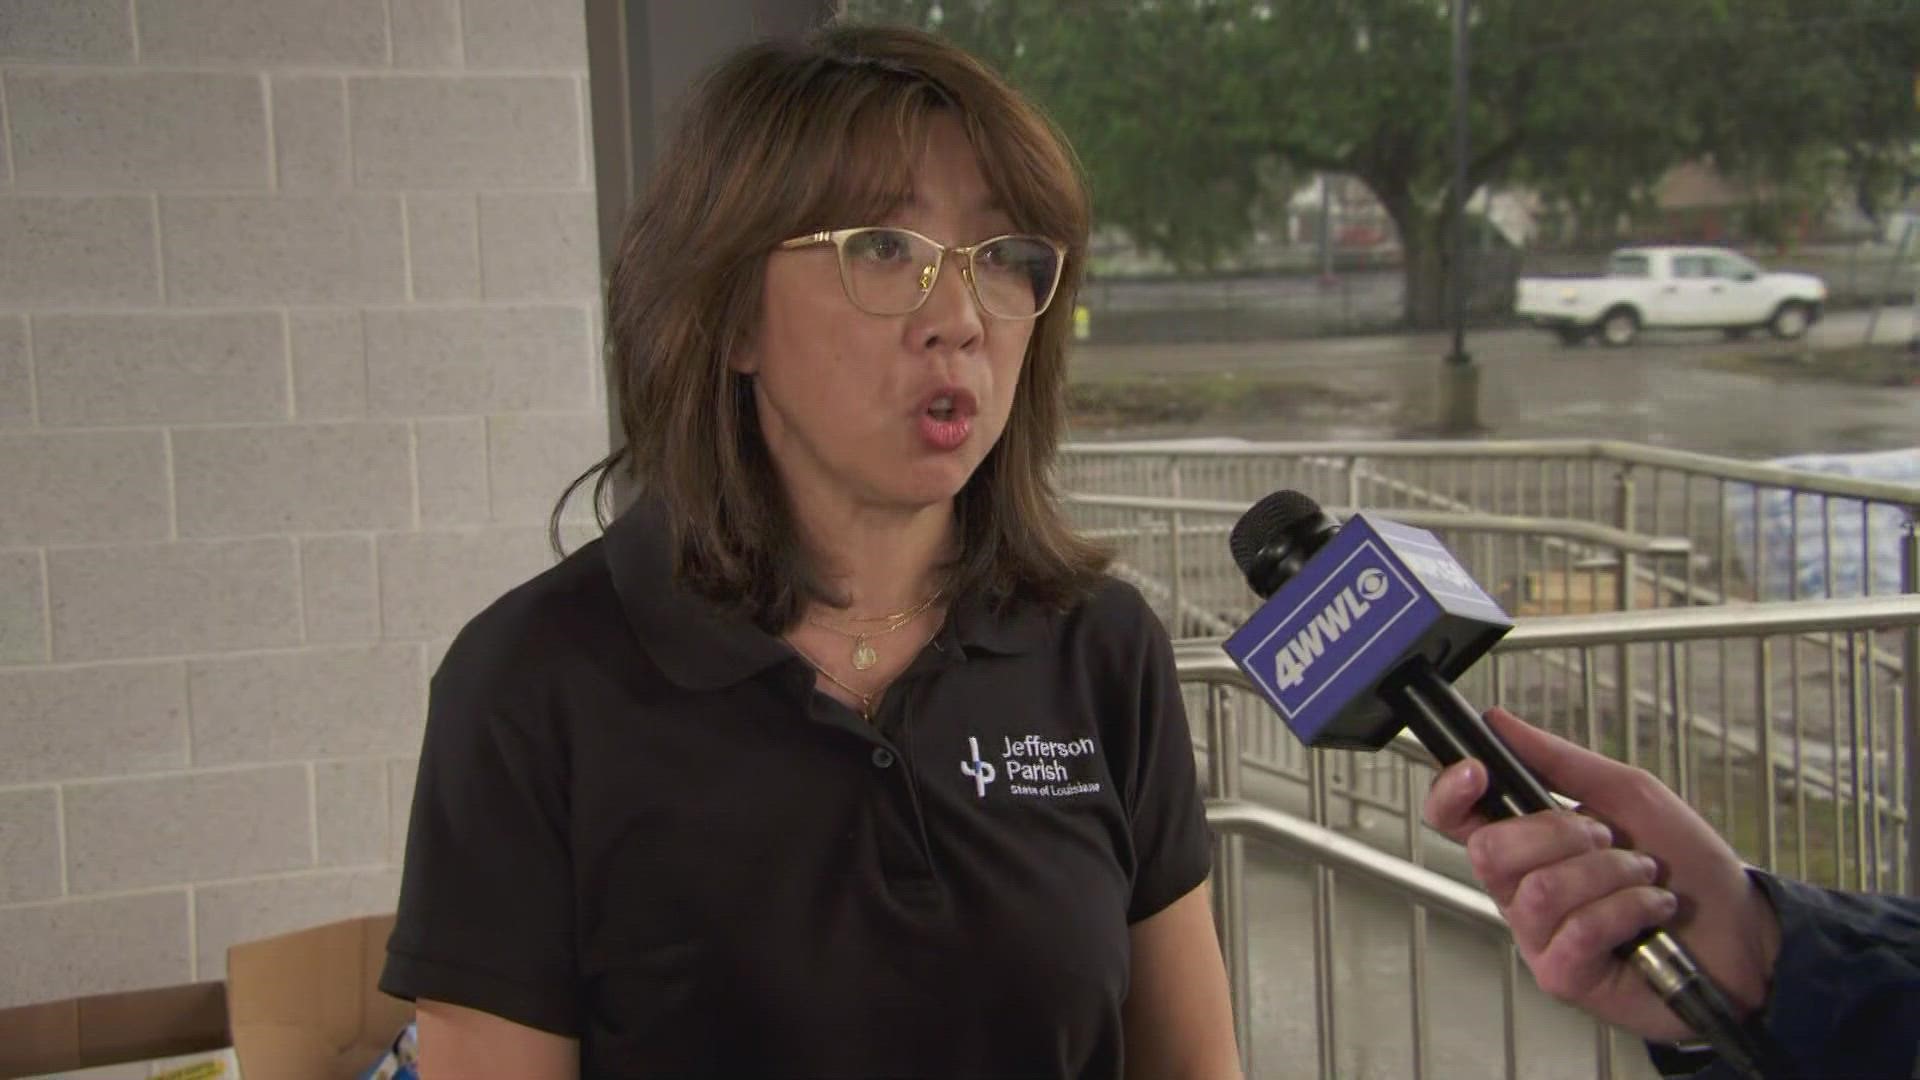 One month after Hurricane Ida, Jefferson Parish President Cynthia Lee Sheng says her parish needs trailers for its hardest hit residents.